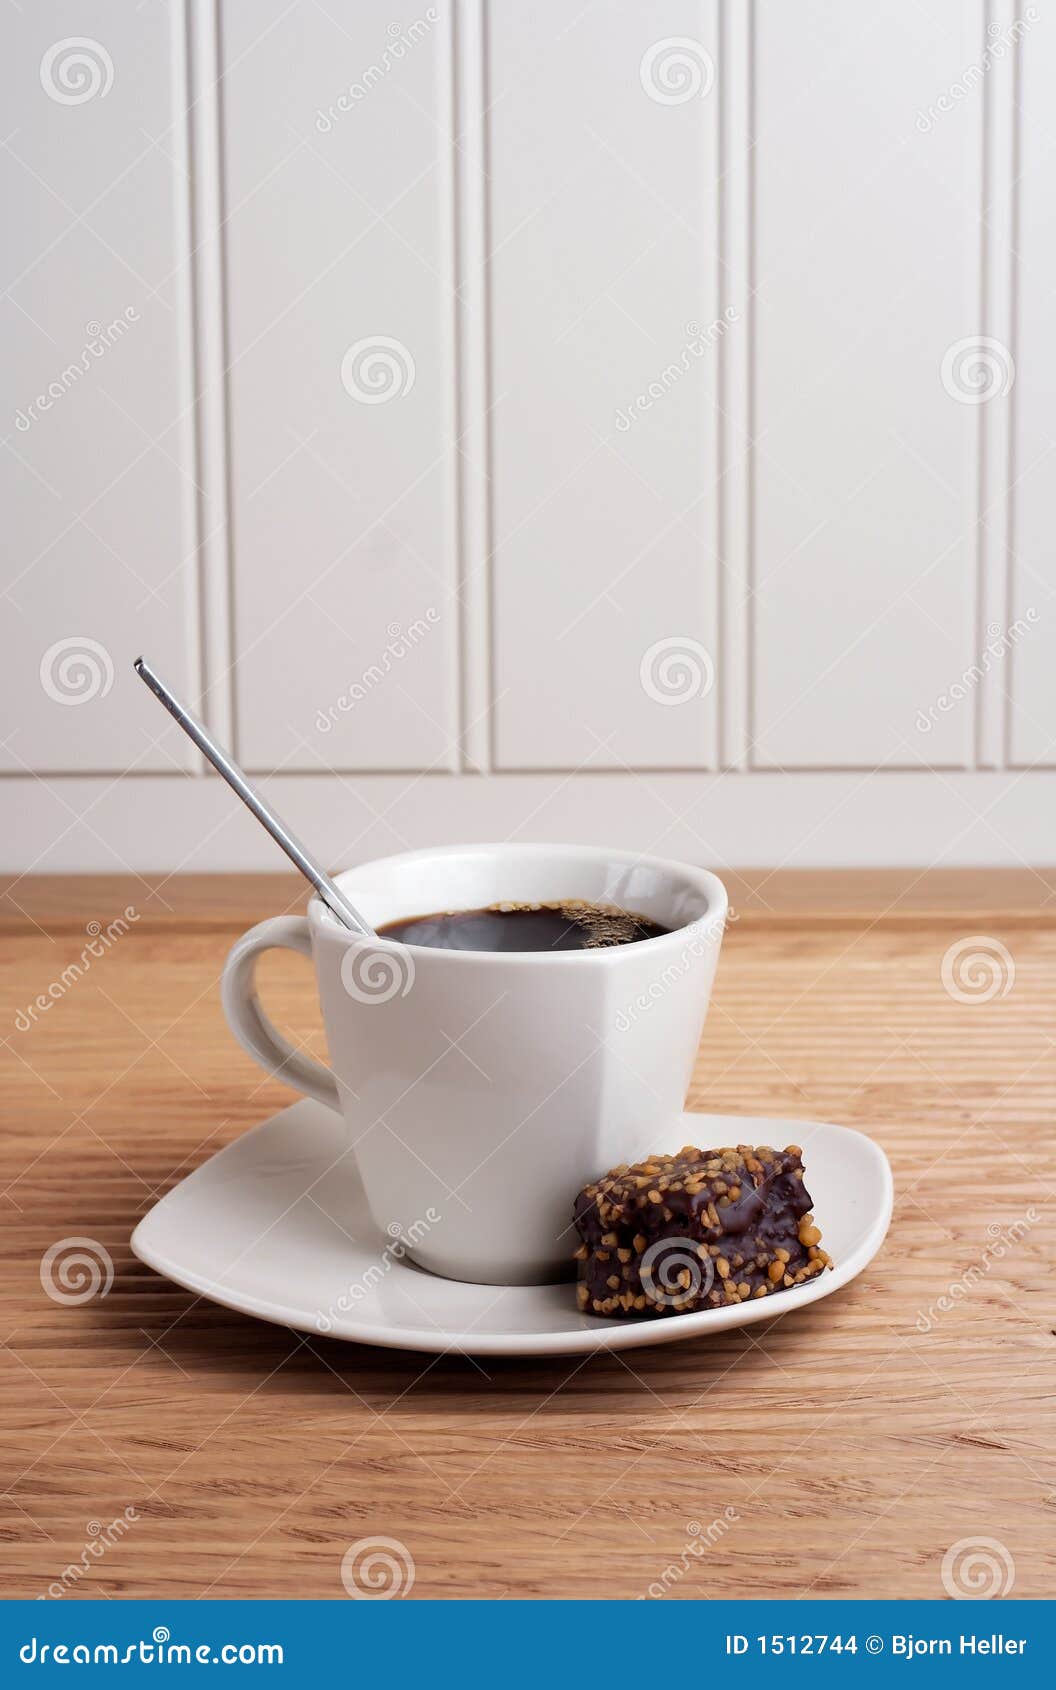 Coffee Cup with Brownie - Portrait View Stock Photo - Image of ...